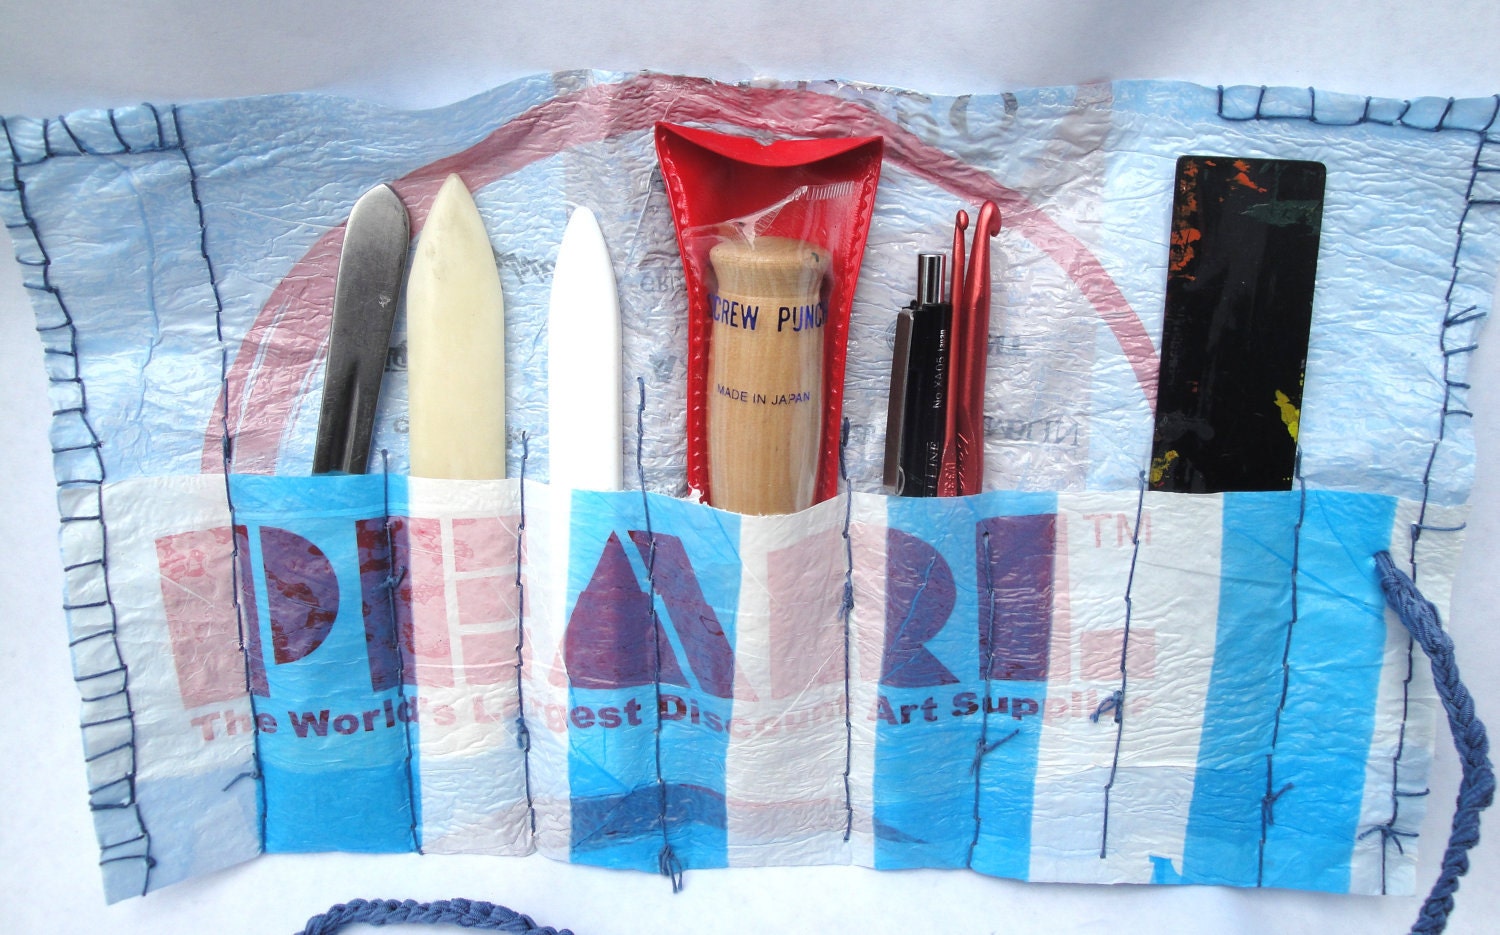 Bookbinding Tool Quiver. Or Art Tool Organizer. From Recycled Plastic Bags.